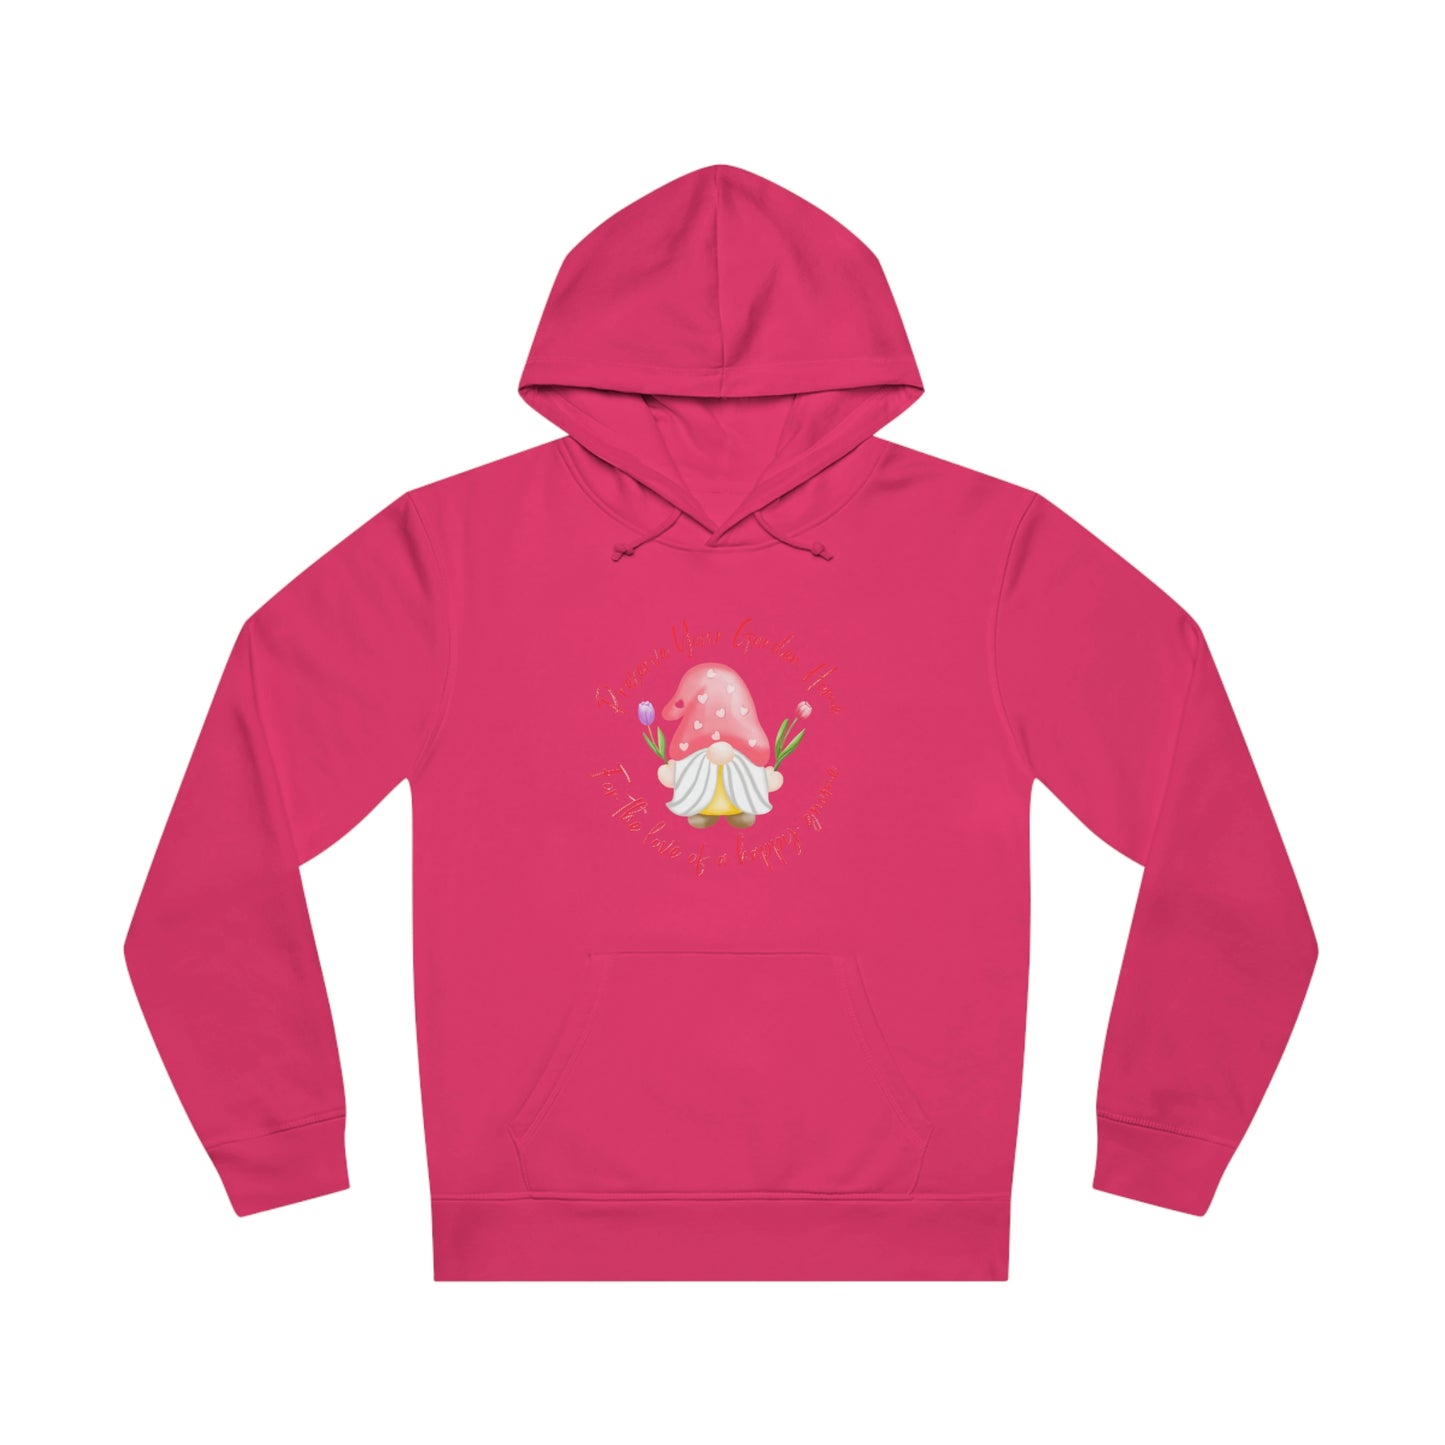 ‘Preserve your garden home, for the love of a happy gnome’ Eco-Friendly. Printed Front & Back. Unisex Drummer Hoodie